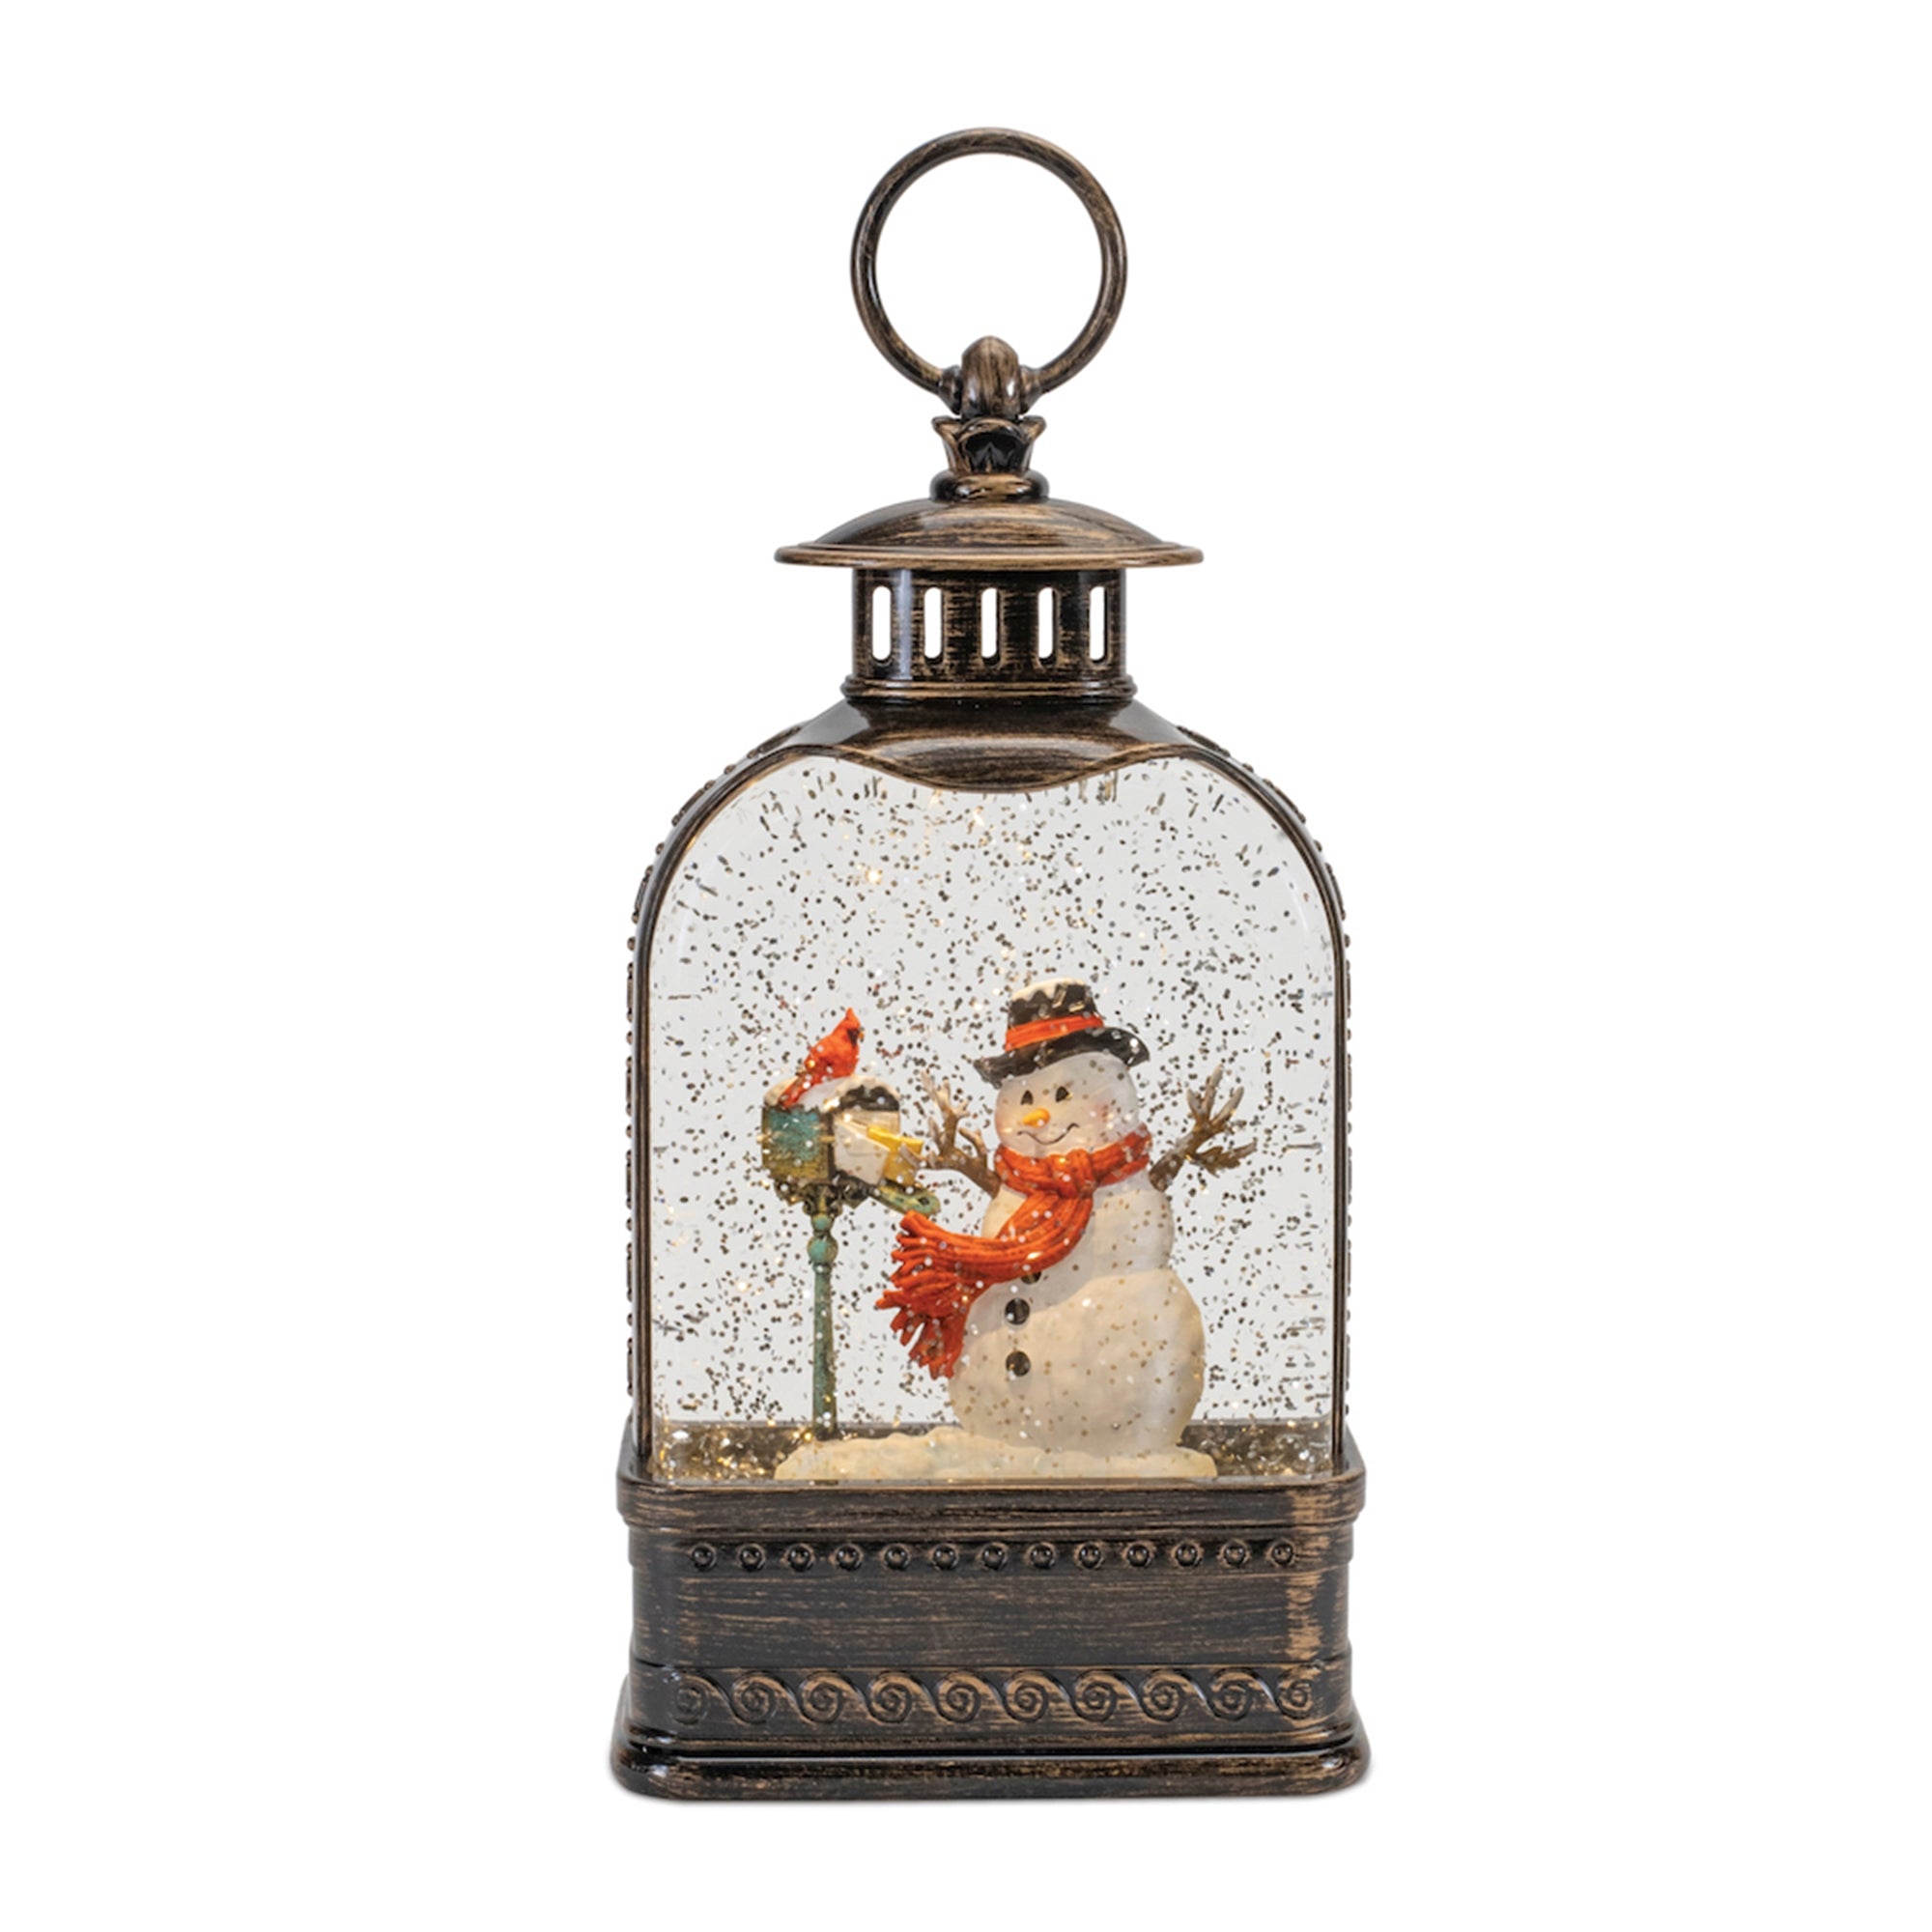 LED Snow Globe with Snowman and Cardinals 9.75"H